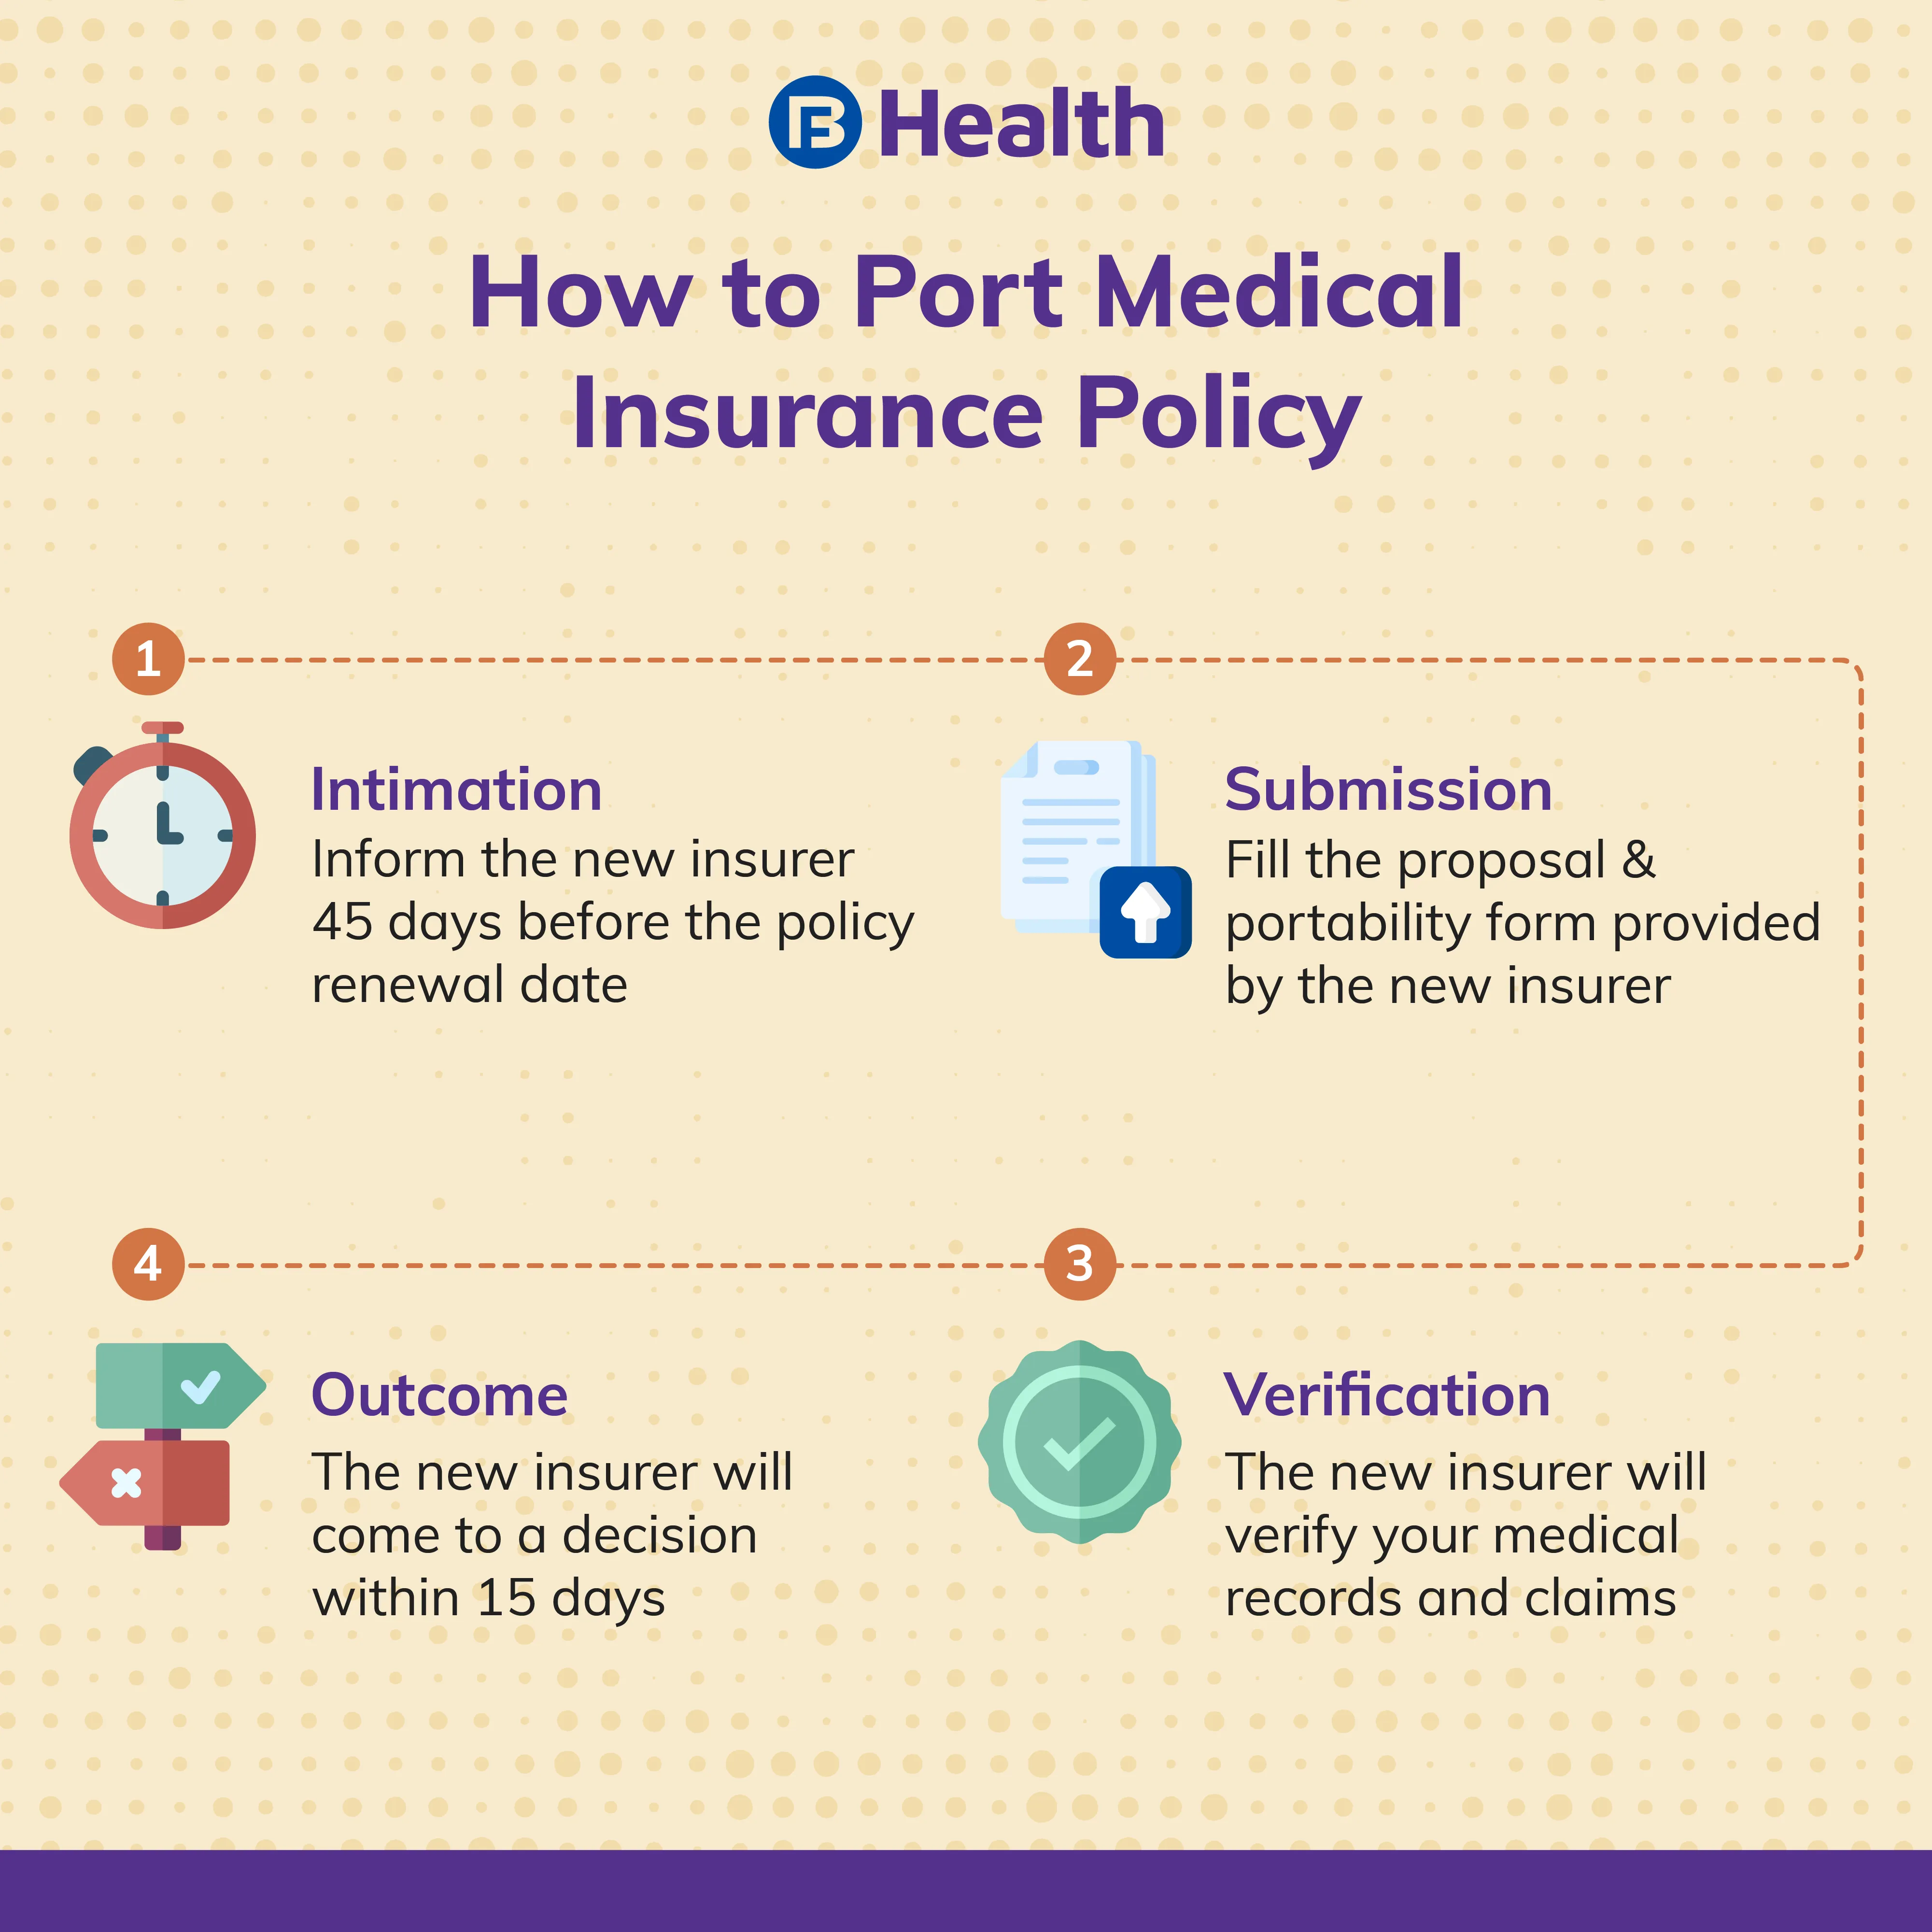 how to port medical insurance